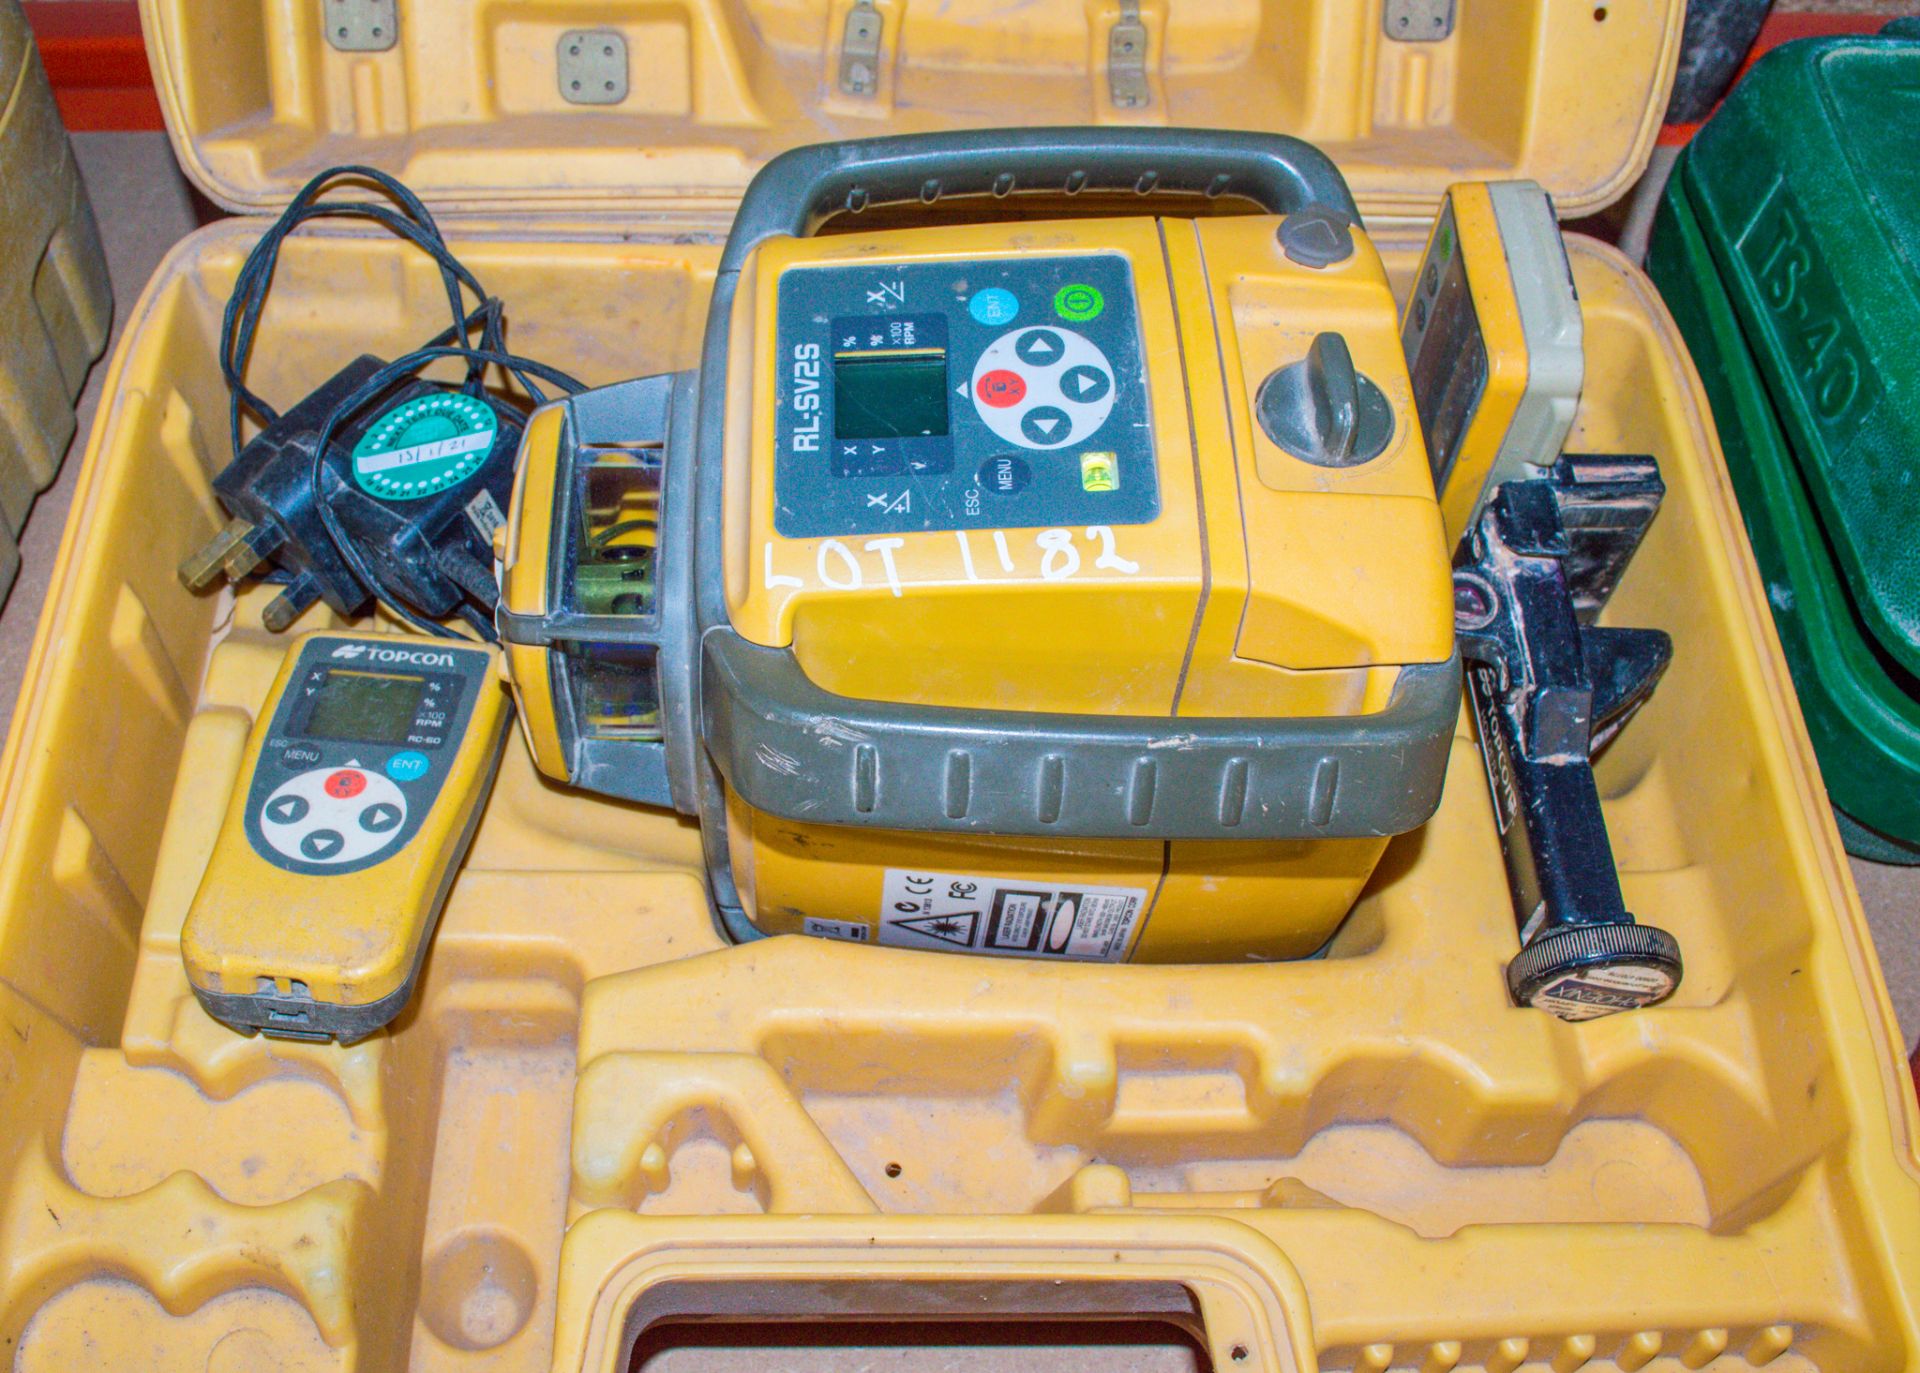 Topcon RL-SV2S rotating laser level c/w charger, battery, remote, Topcon LS-80L receiver & carry